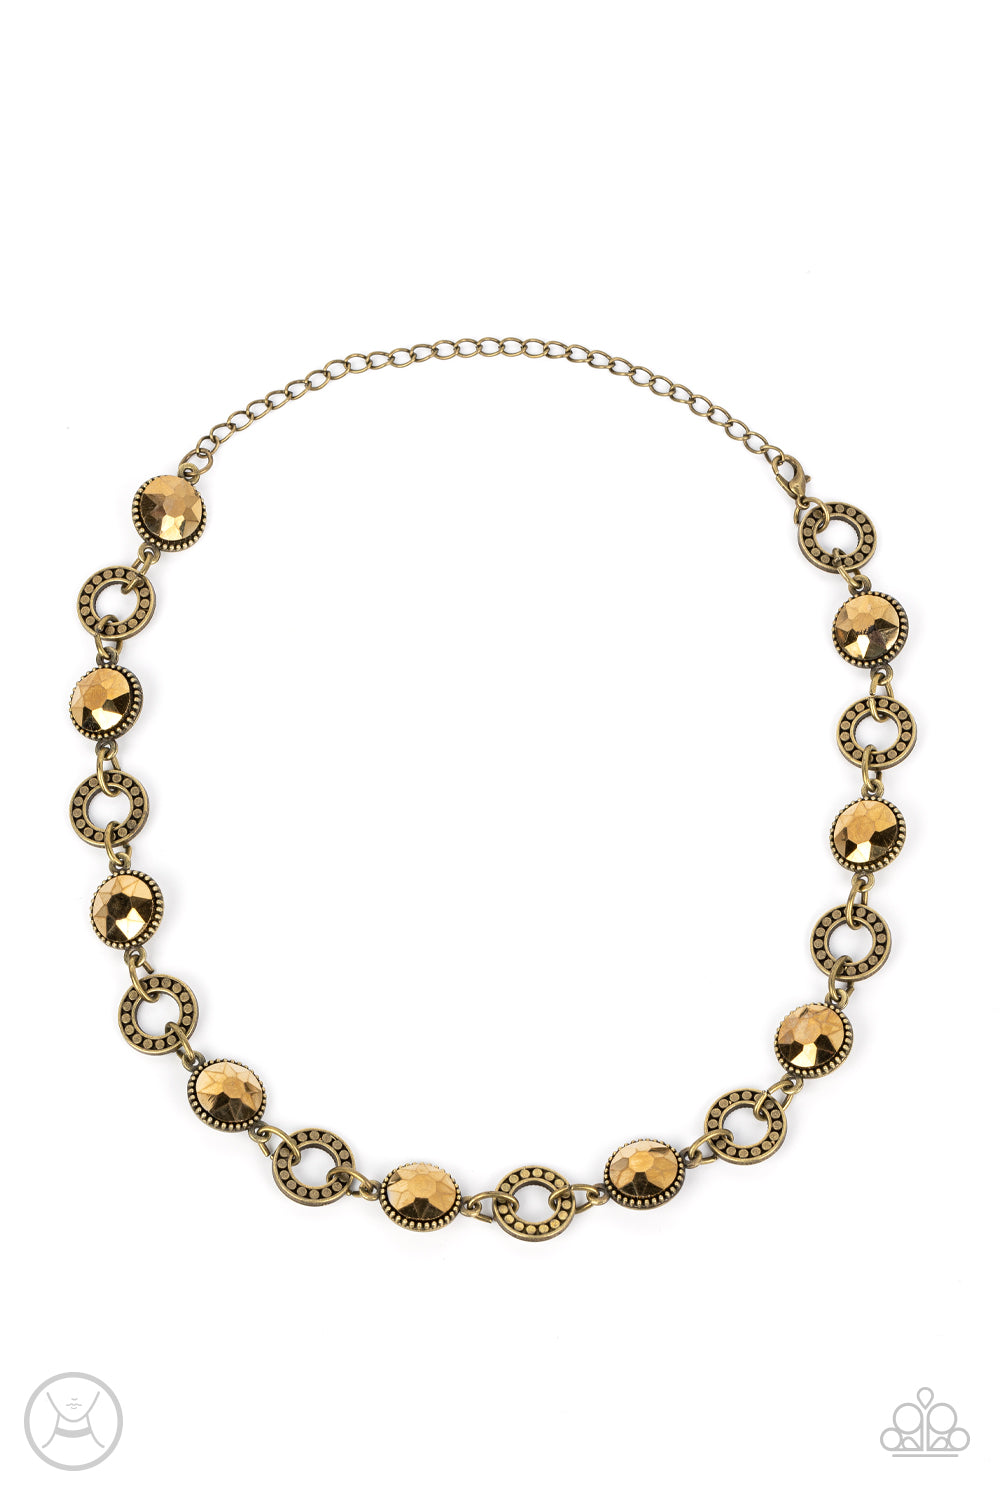 Rhinestone Rollout Brass Necklace - Paparazzi Accessories  Dramatic aurum gems encased in daintily dotted brass frames link with brass rings finished with flattened studded texture. The smoldering aurum rhinestones and edgy rings alternate around the neck, resulting in an upscale industrial flair. Features an adjustable clasp closure.  Sold as one individual choker necklace. Includes one pair of matching earrings.